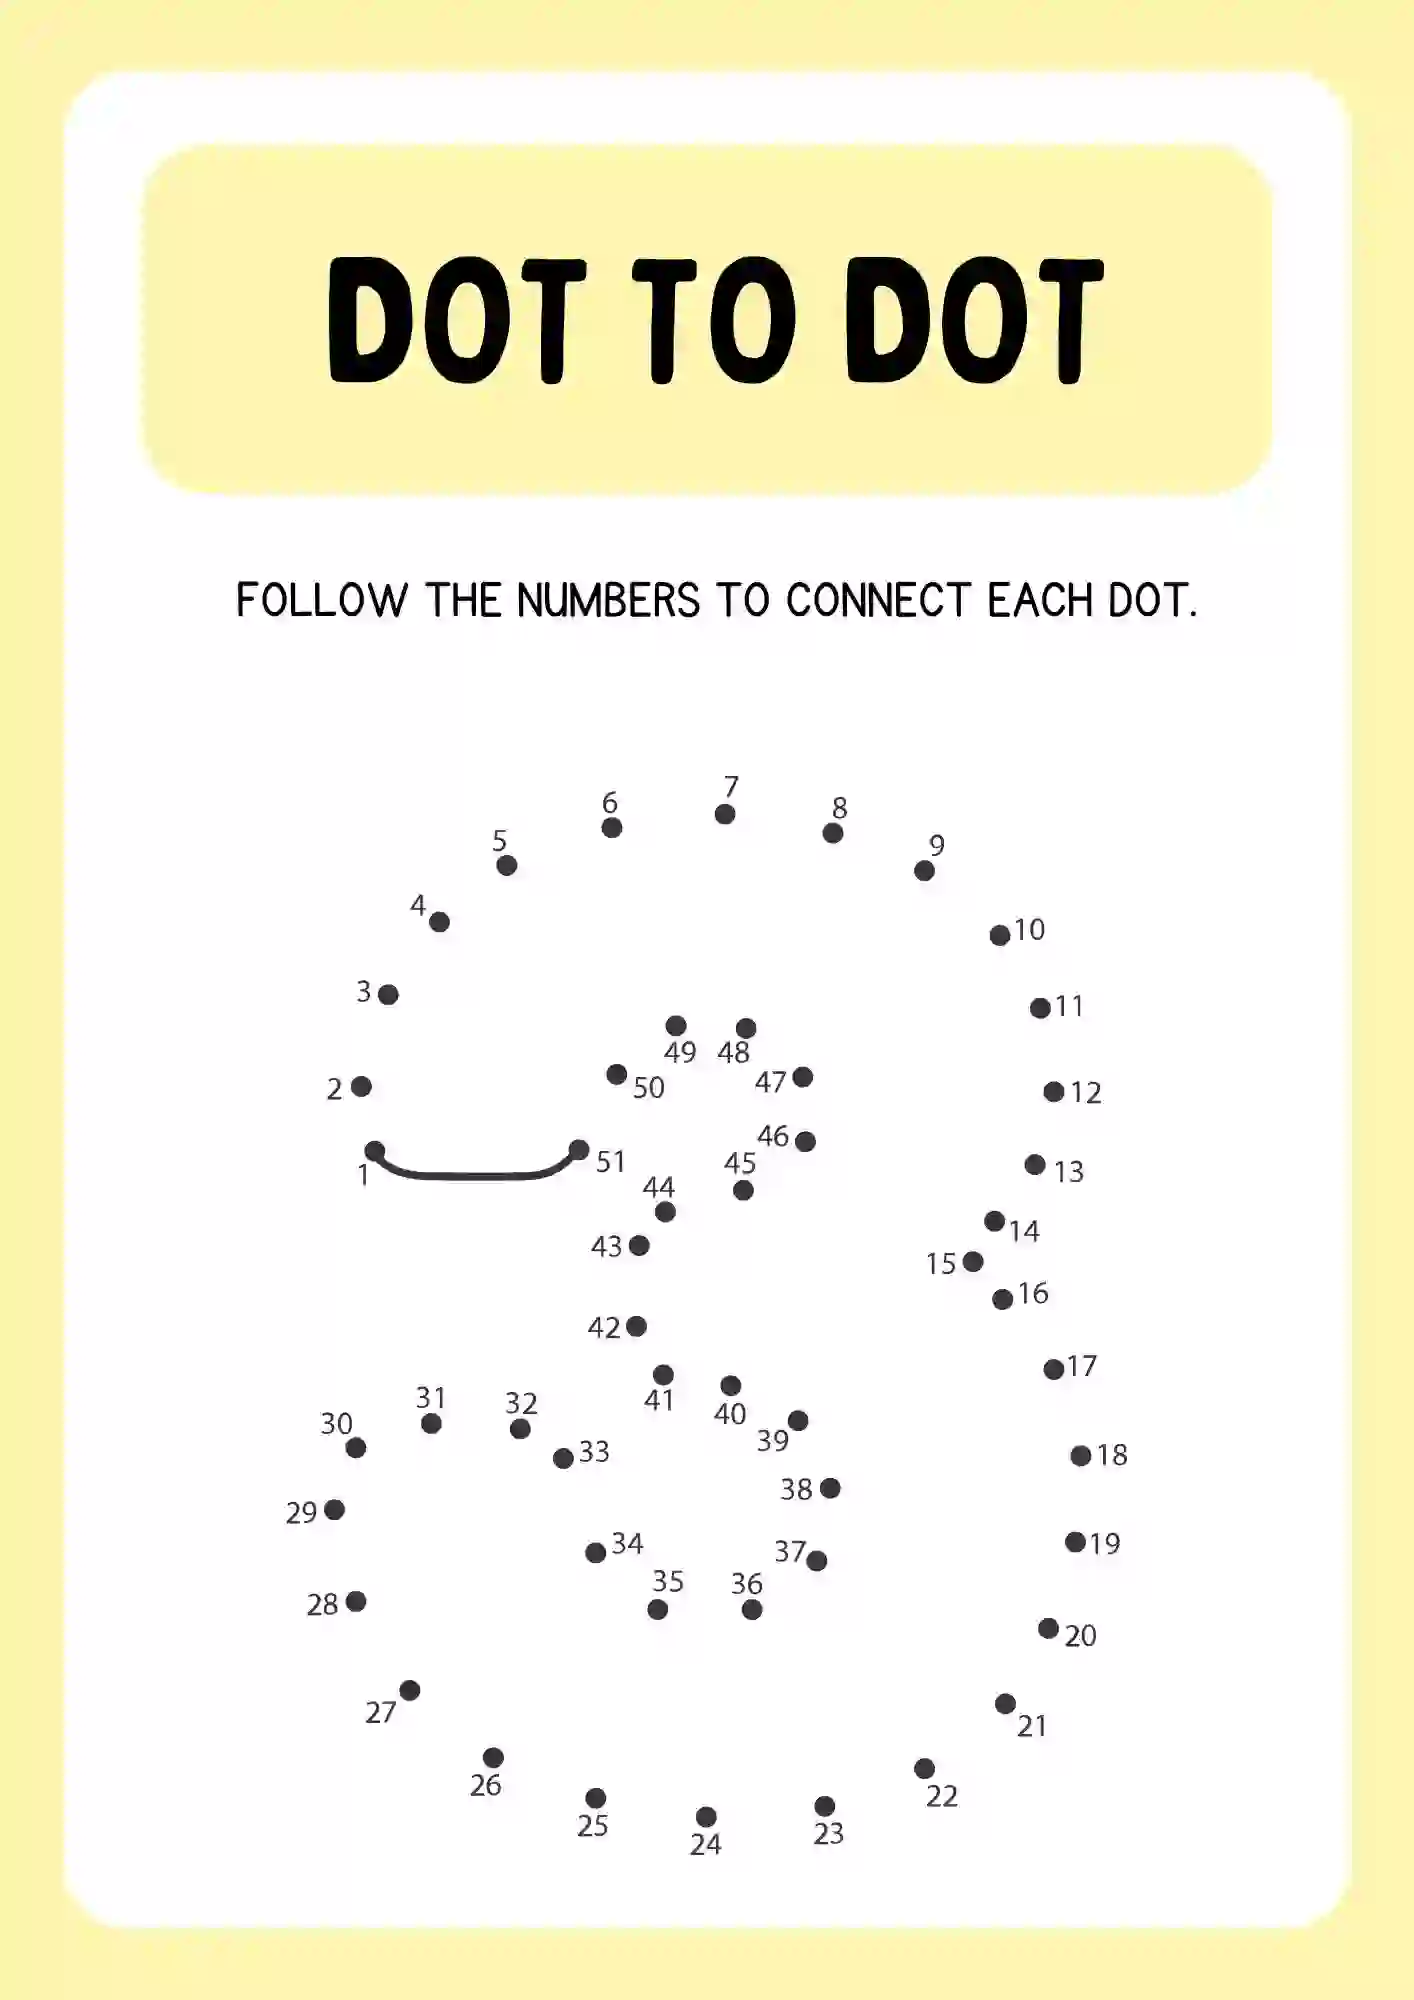 Dot to Dot Connecting Numbers Activity Worksheets number 3